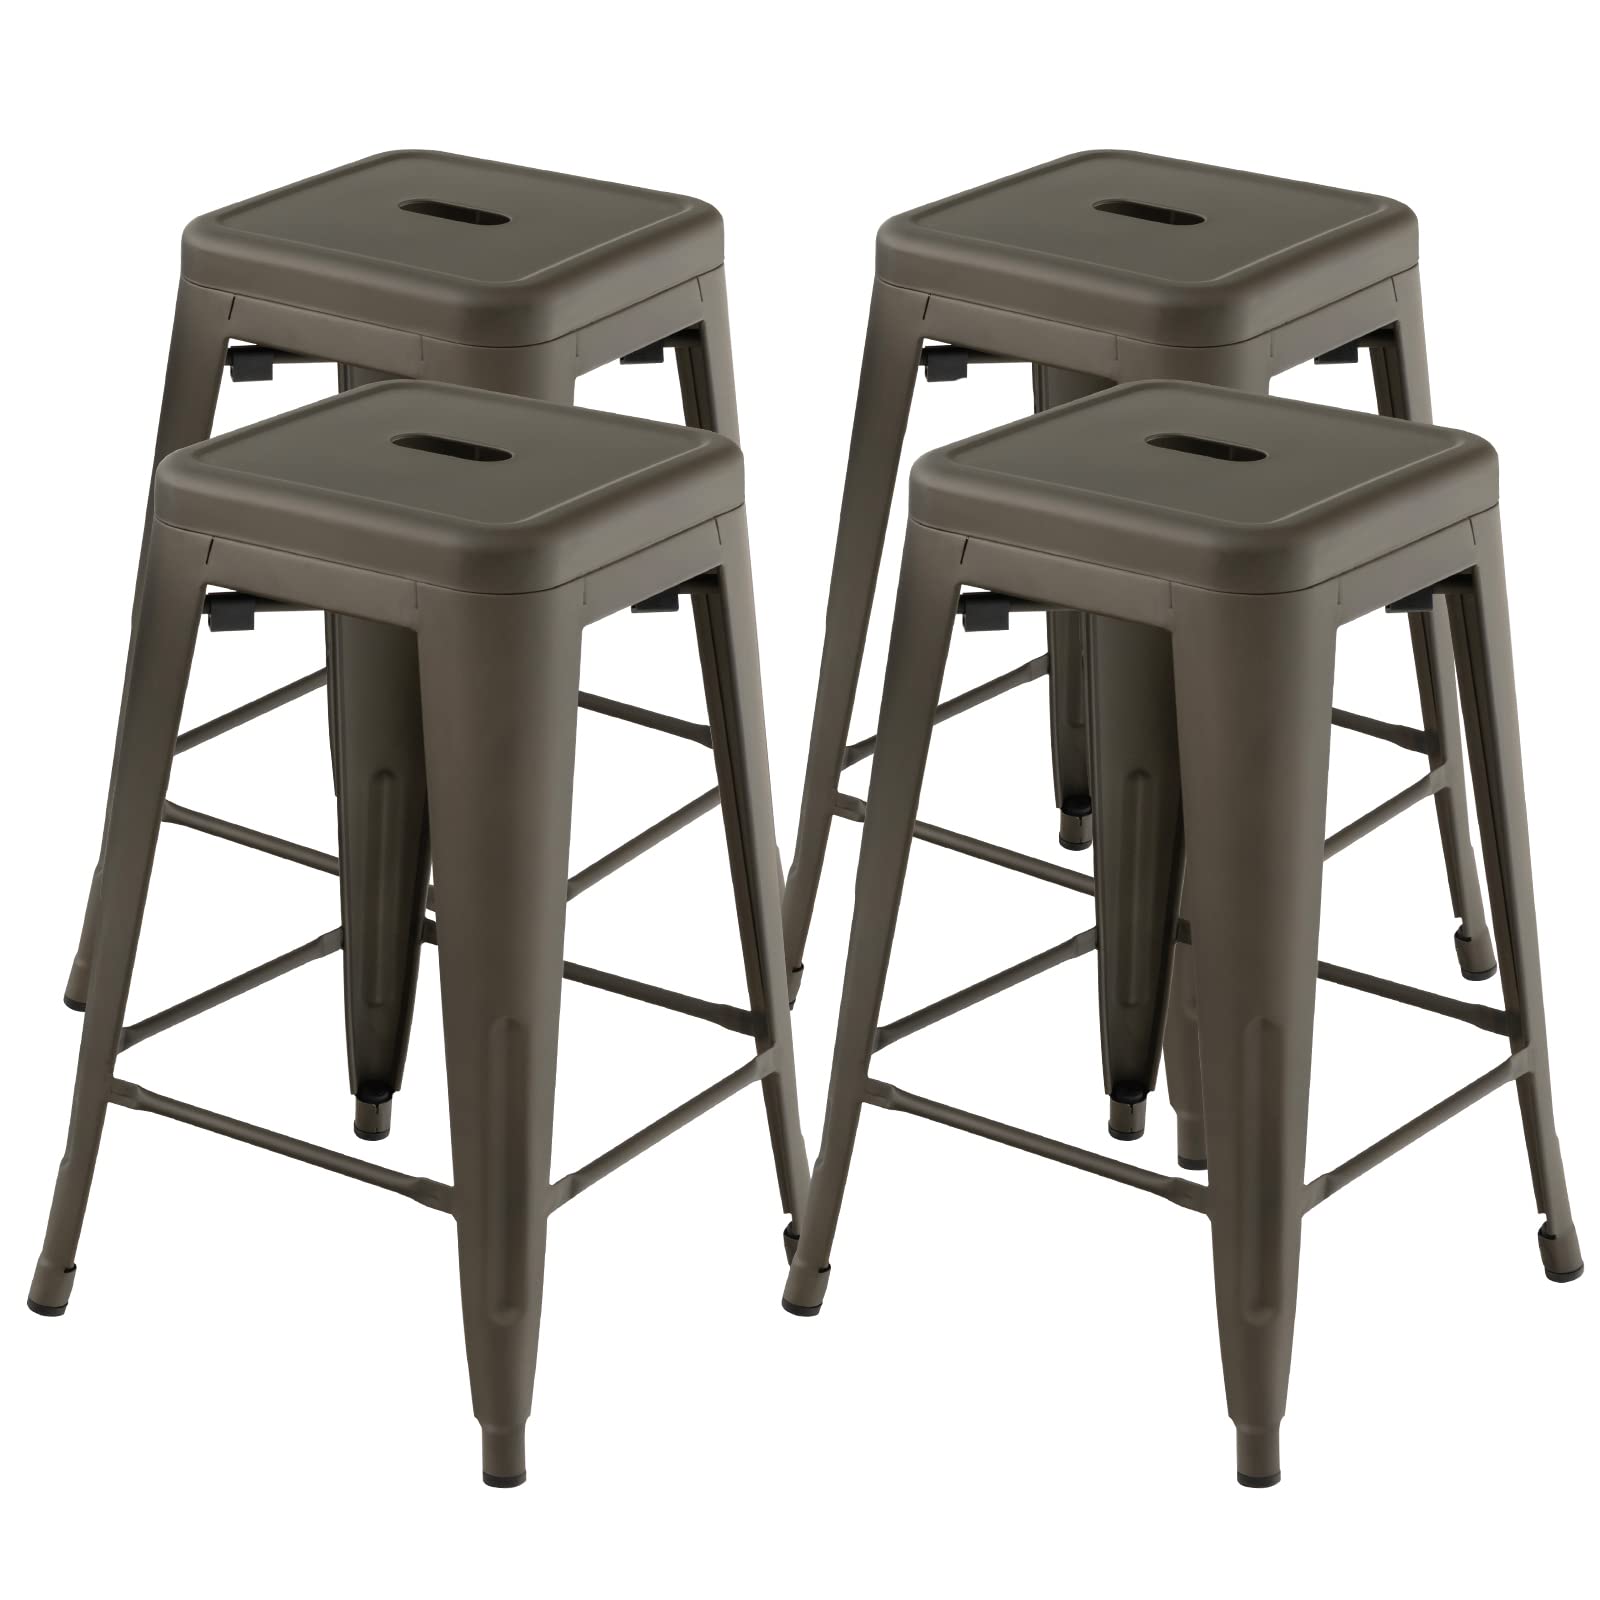 Bar Stools Set of 4, 24” or 30" Stackable Metal Stools with Square Seat & Handing Hole, X-shaped Reinforced Design